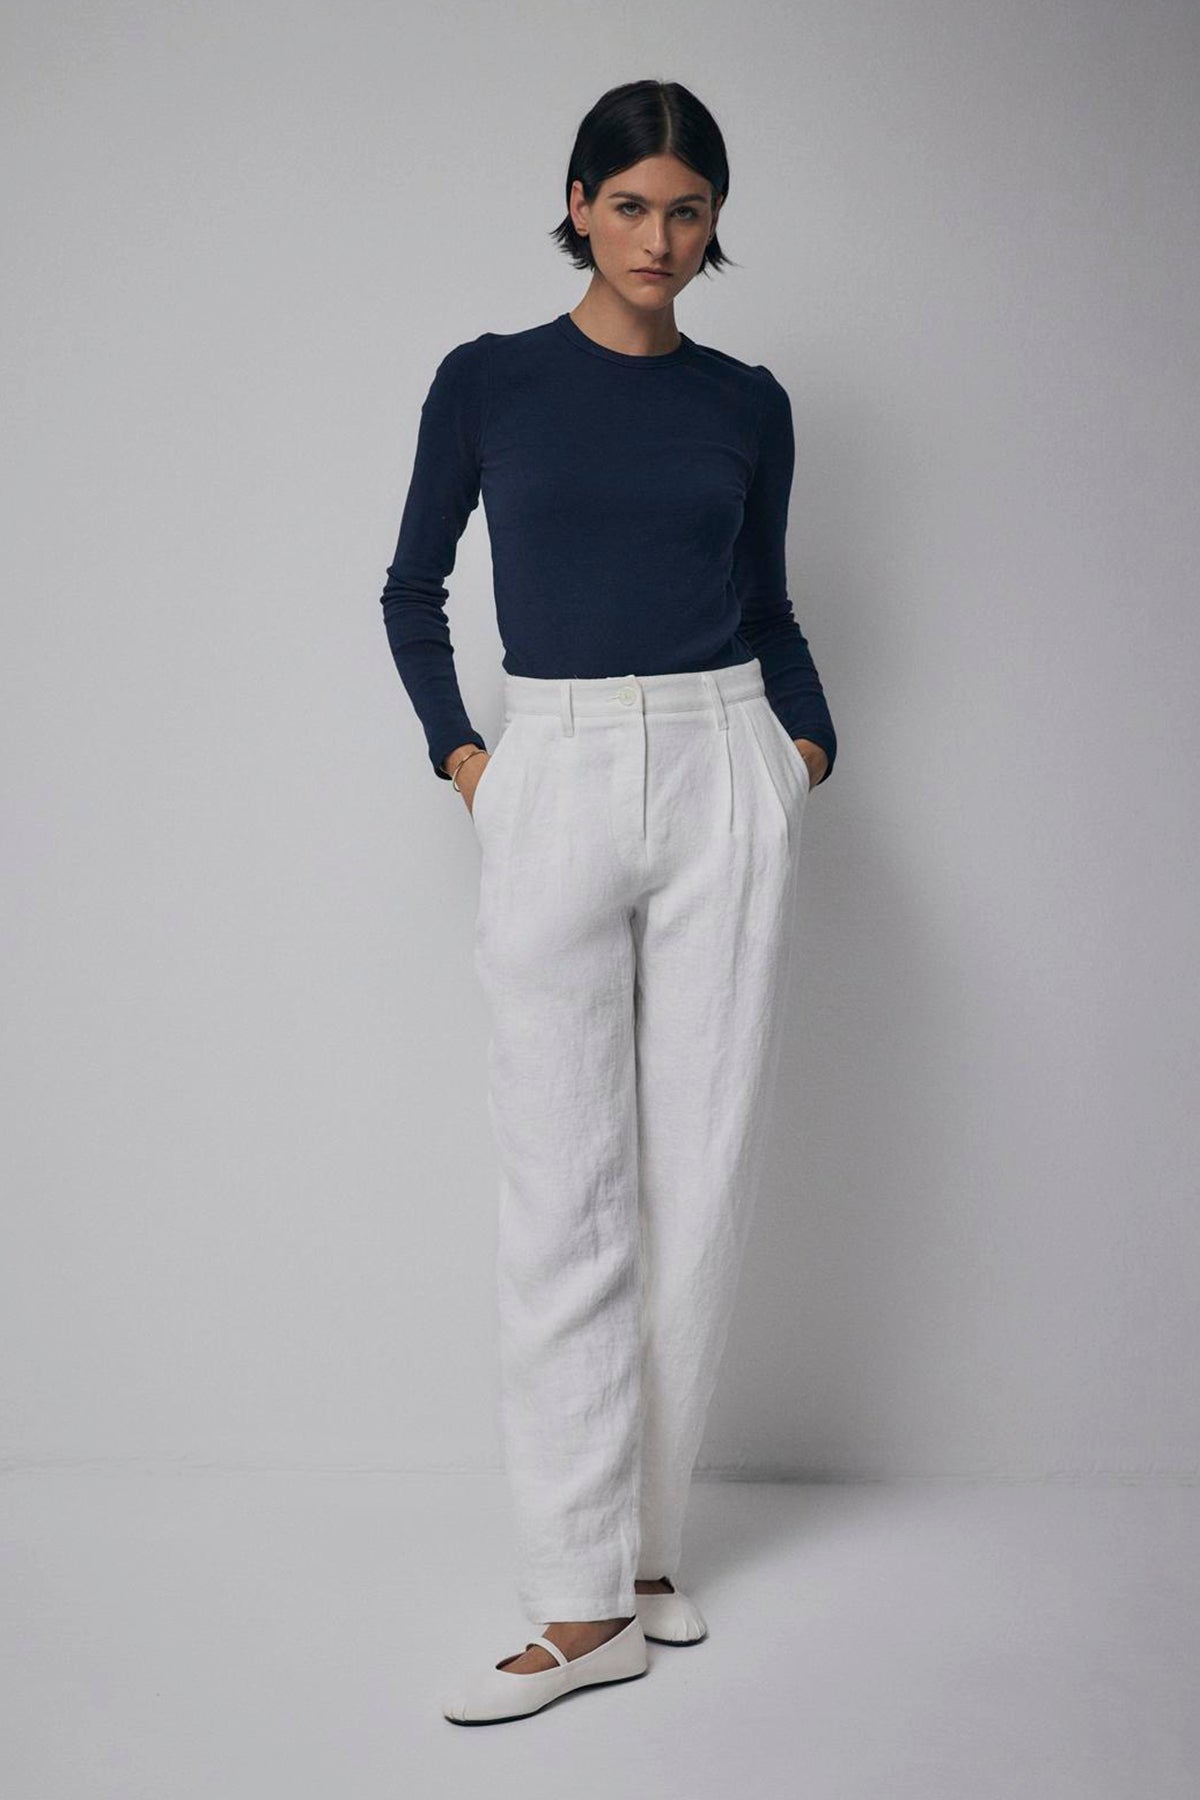 Woman in a navy blue top and Velvet by Jenny Graham's POMONA PANT posing against a gray background.-36463689171137